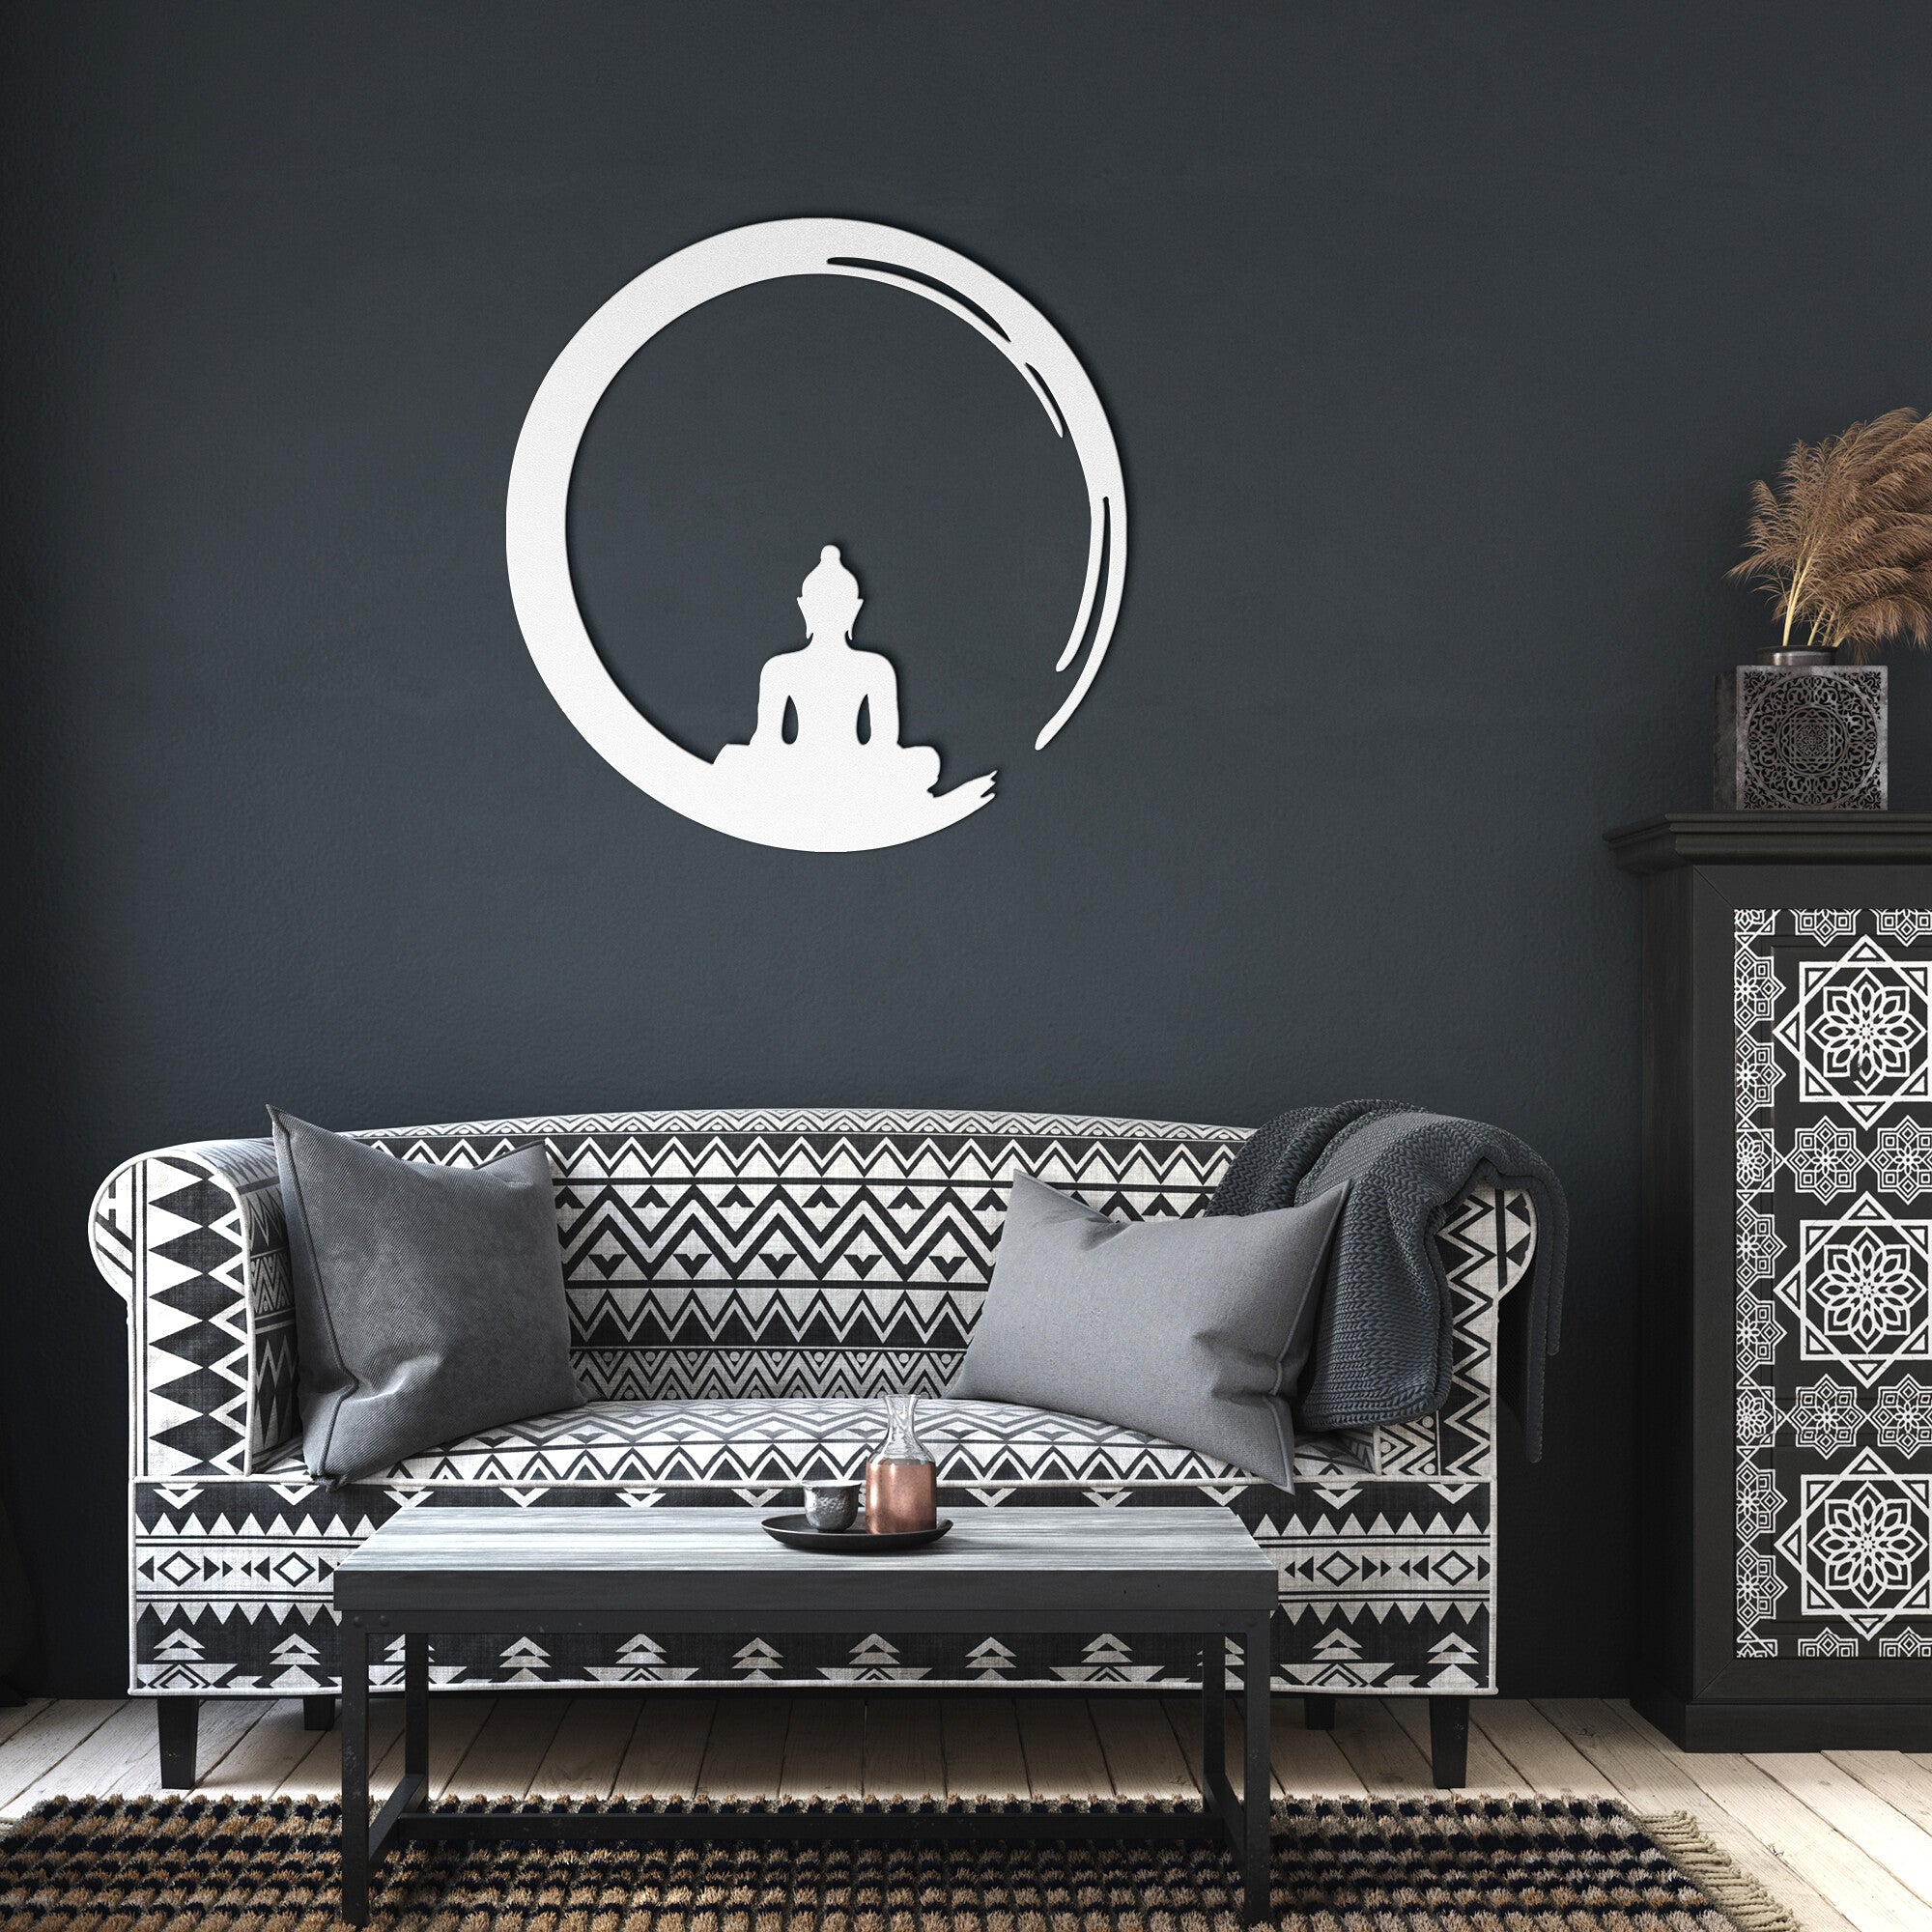 Zen enso buddhism yoga and zen wall art - Personal Hour for Yoga and Meditations 